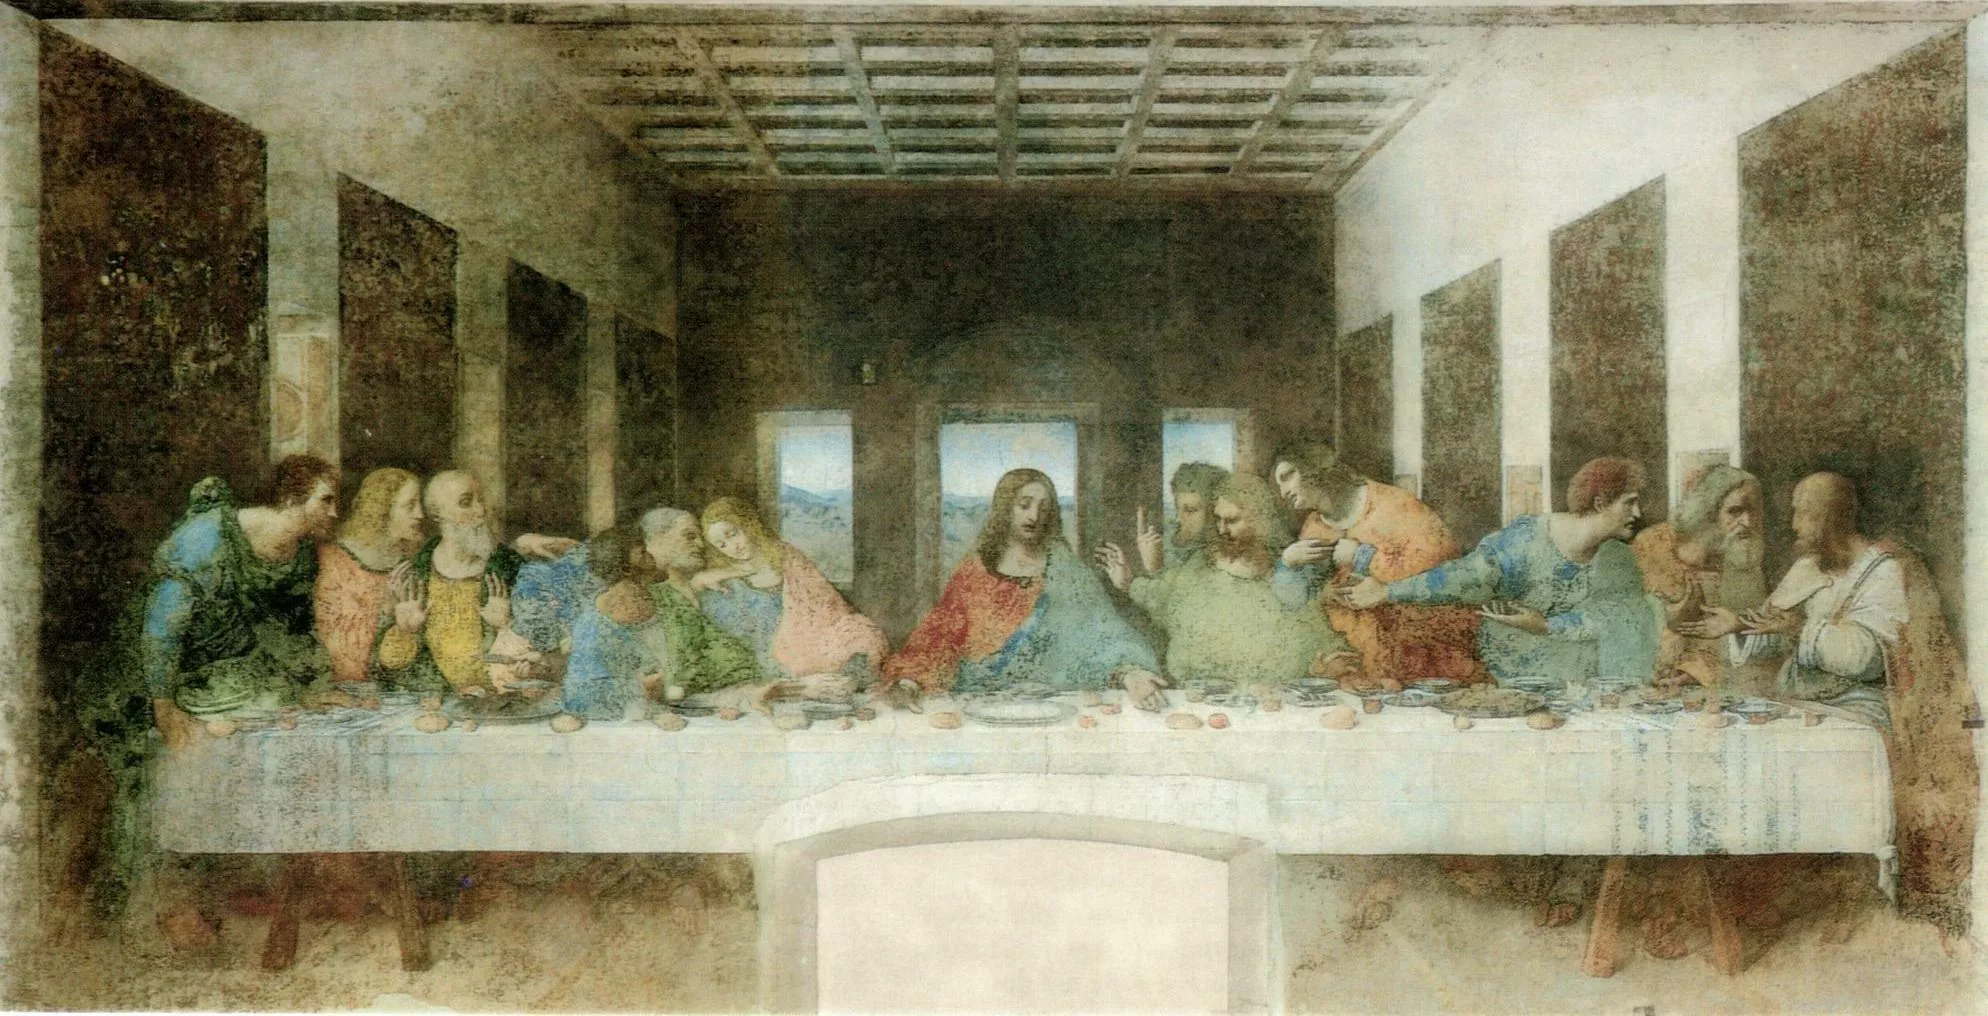 The Last supper painting done using Mural Painting Medium